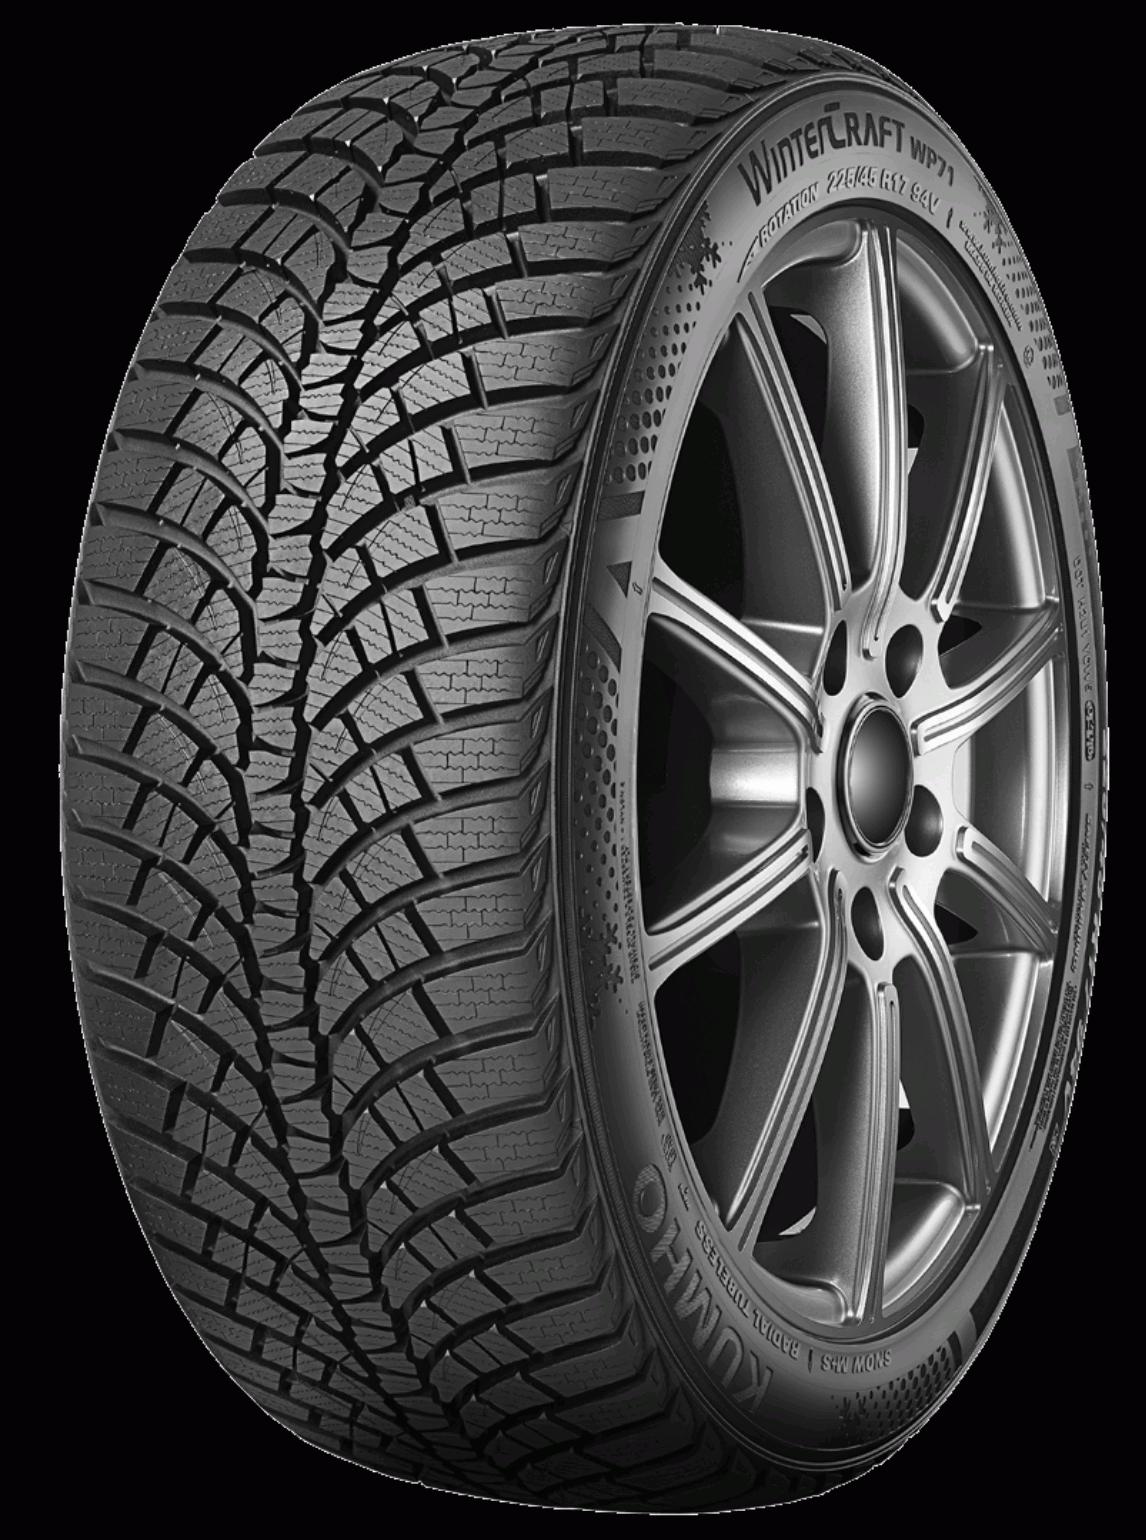 Kumho WinterCraft WP71 - Tyre Reviews and Tests